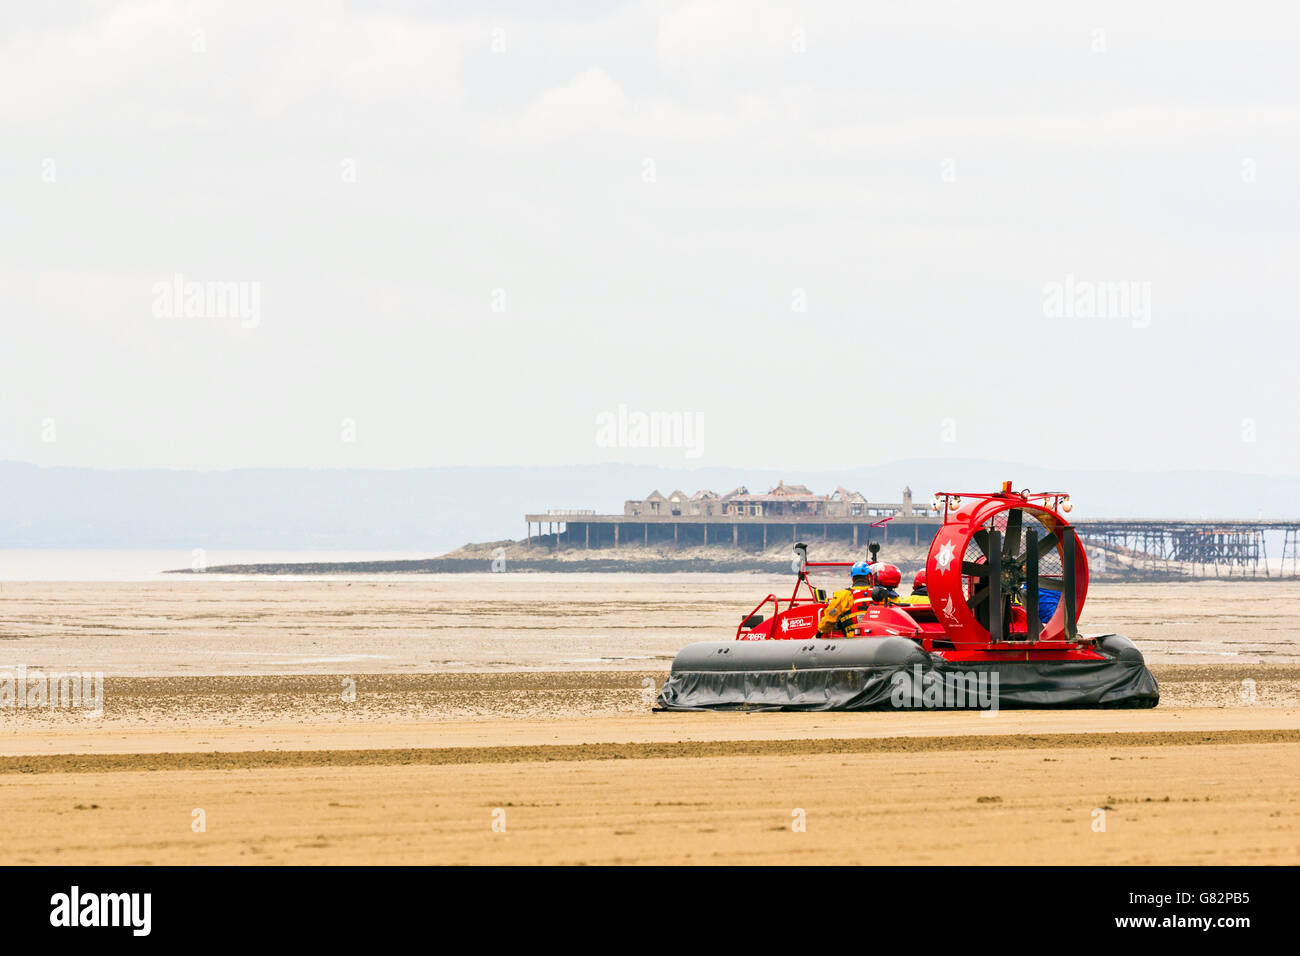 Avon fire and rescue hovercraft patrolling the beach during the Weston Air Festival, UK, 18th June 2016. Stock Photo